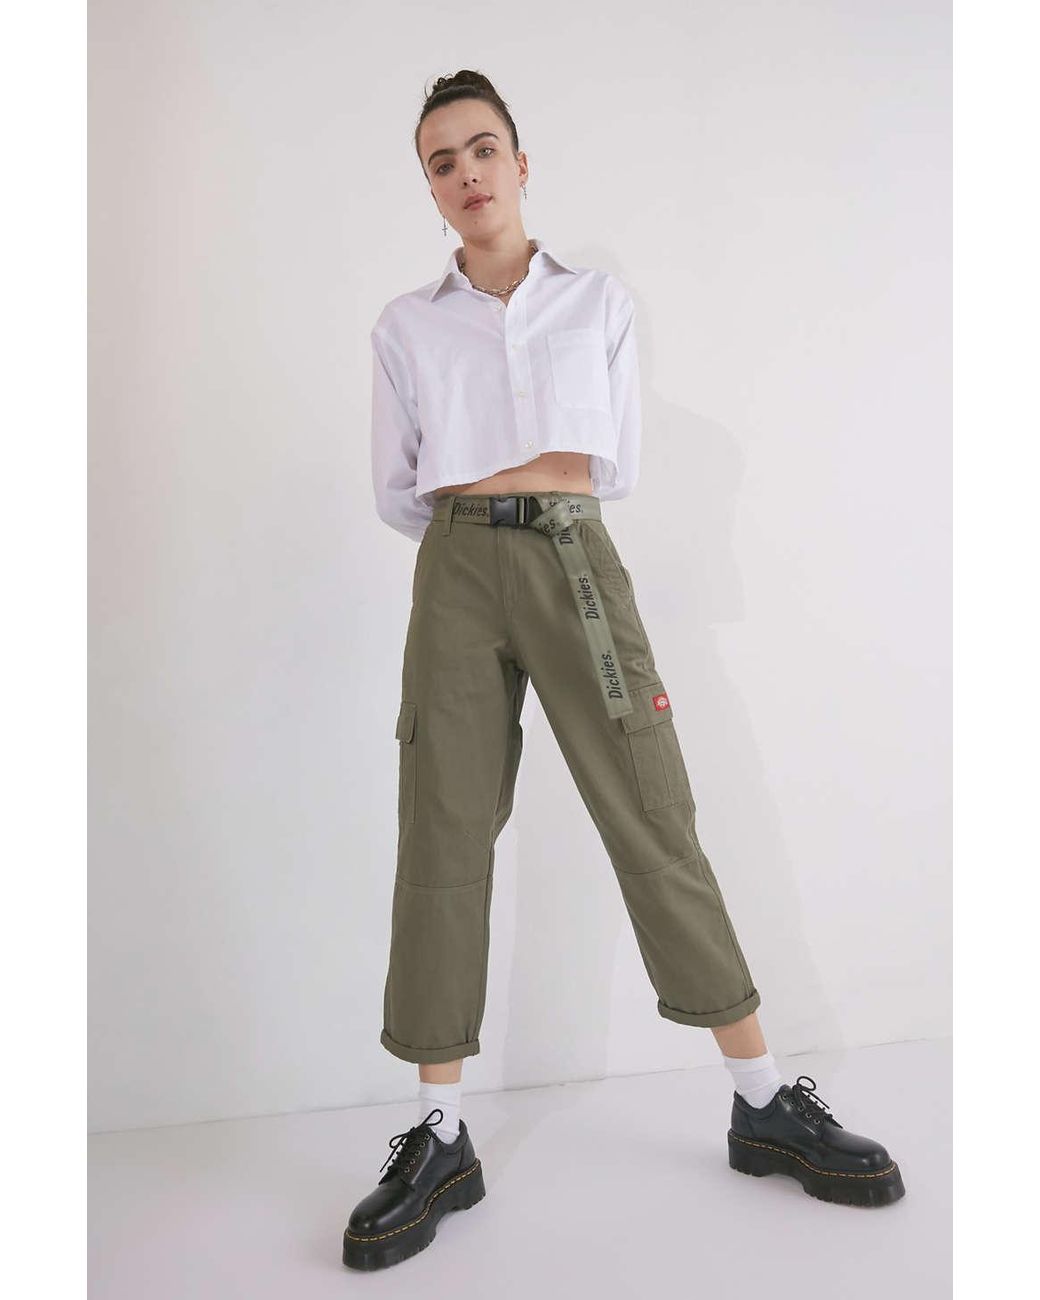 Belted Cargo Pants  Green cargo pants outfit Cargo pants outfit Wear to  work dress